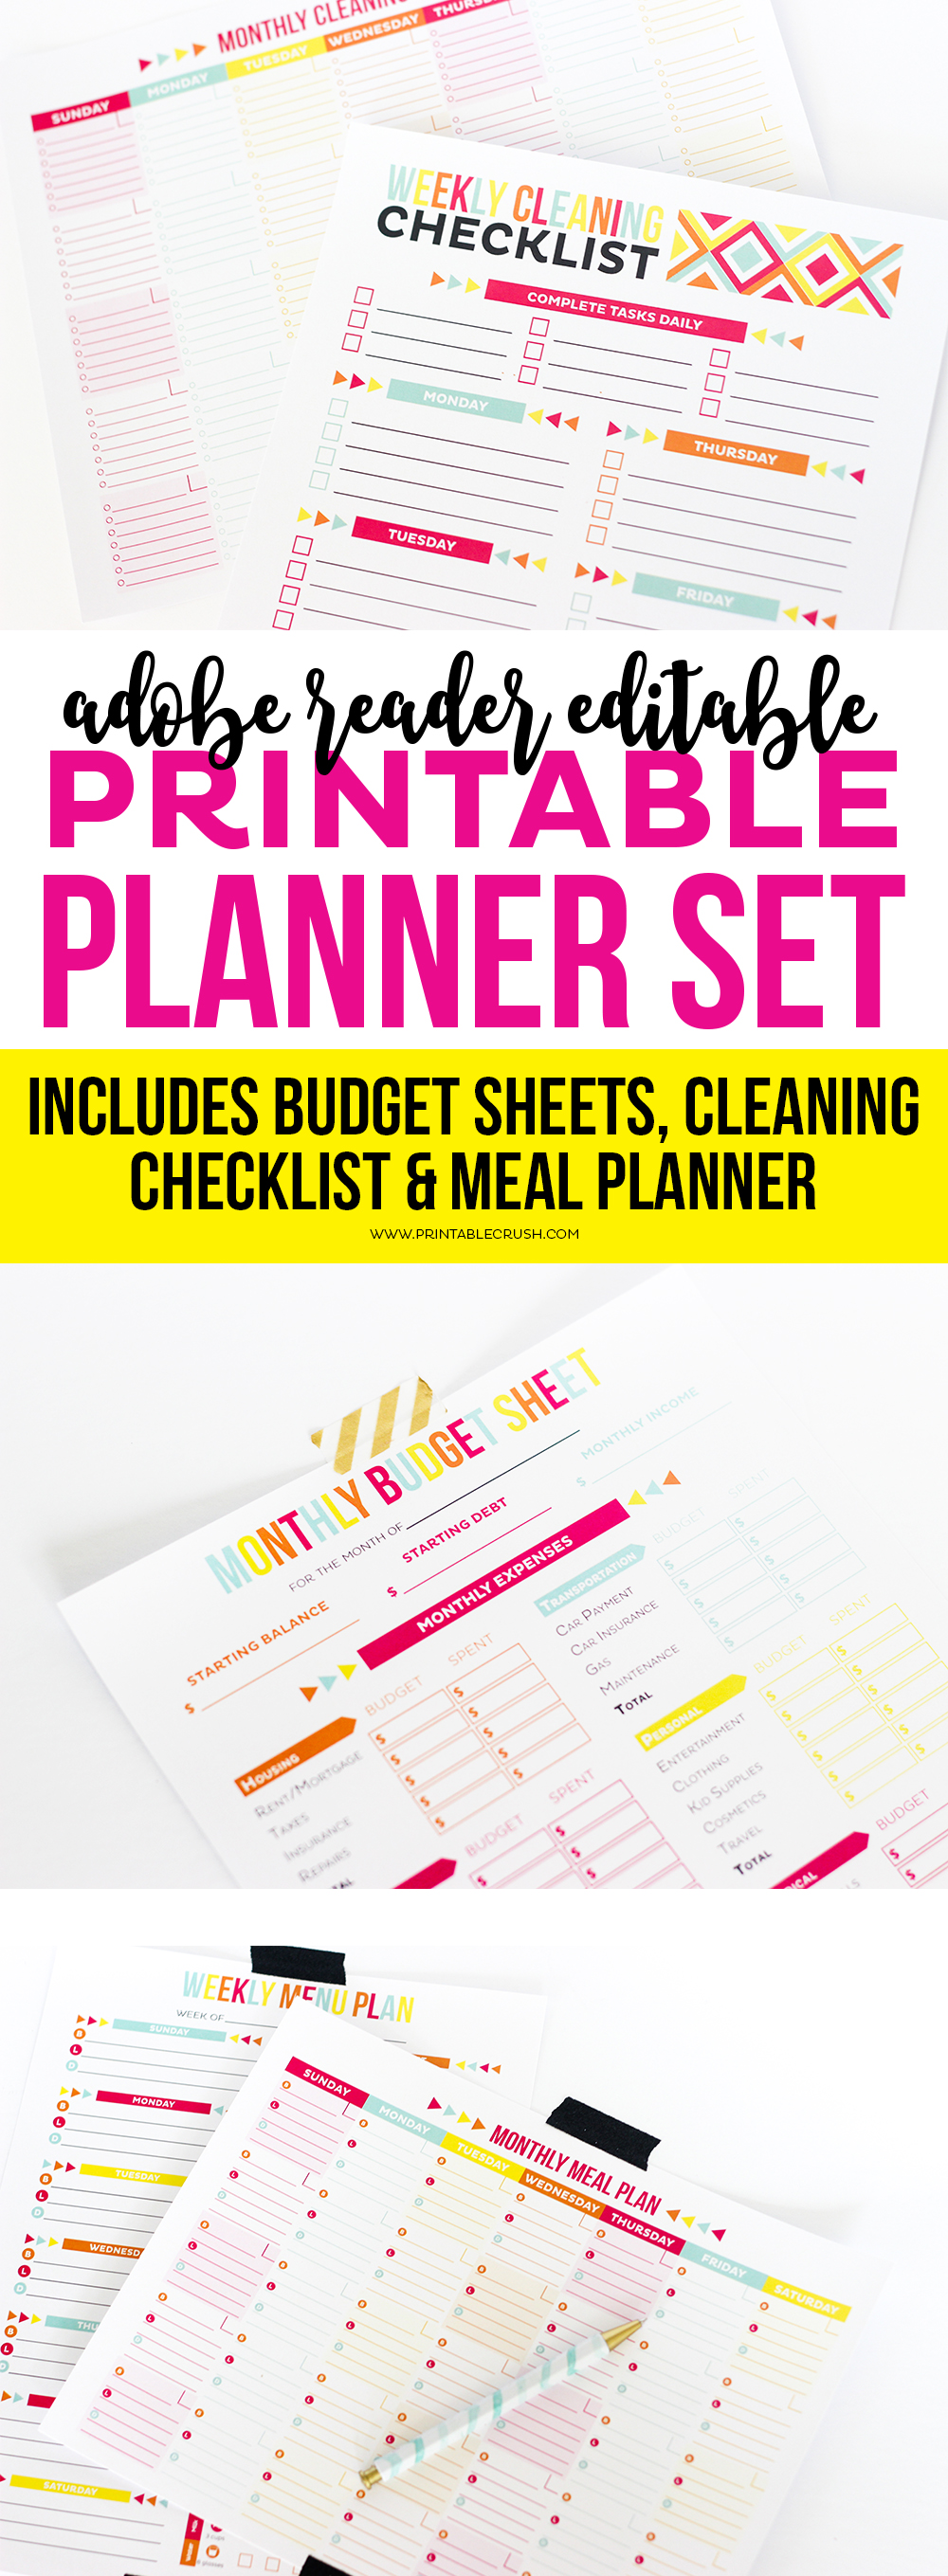 Get these Adobe Reader Editable Planners to keep you more organized! Includes meal planner, budget sheets and a cleaning checklist!